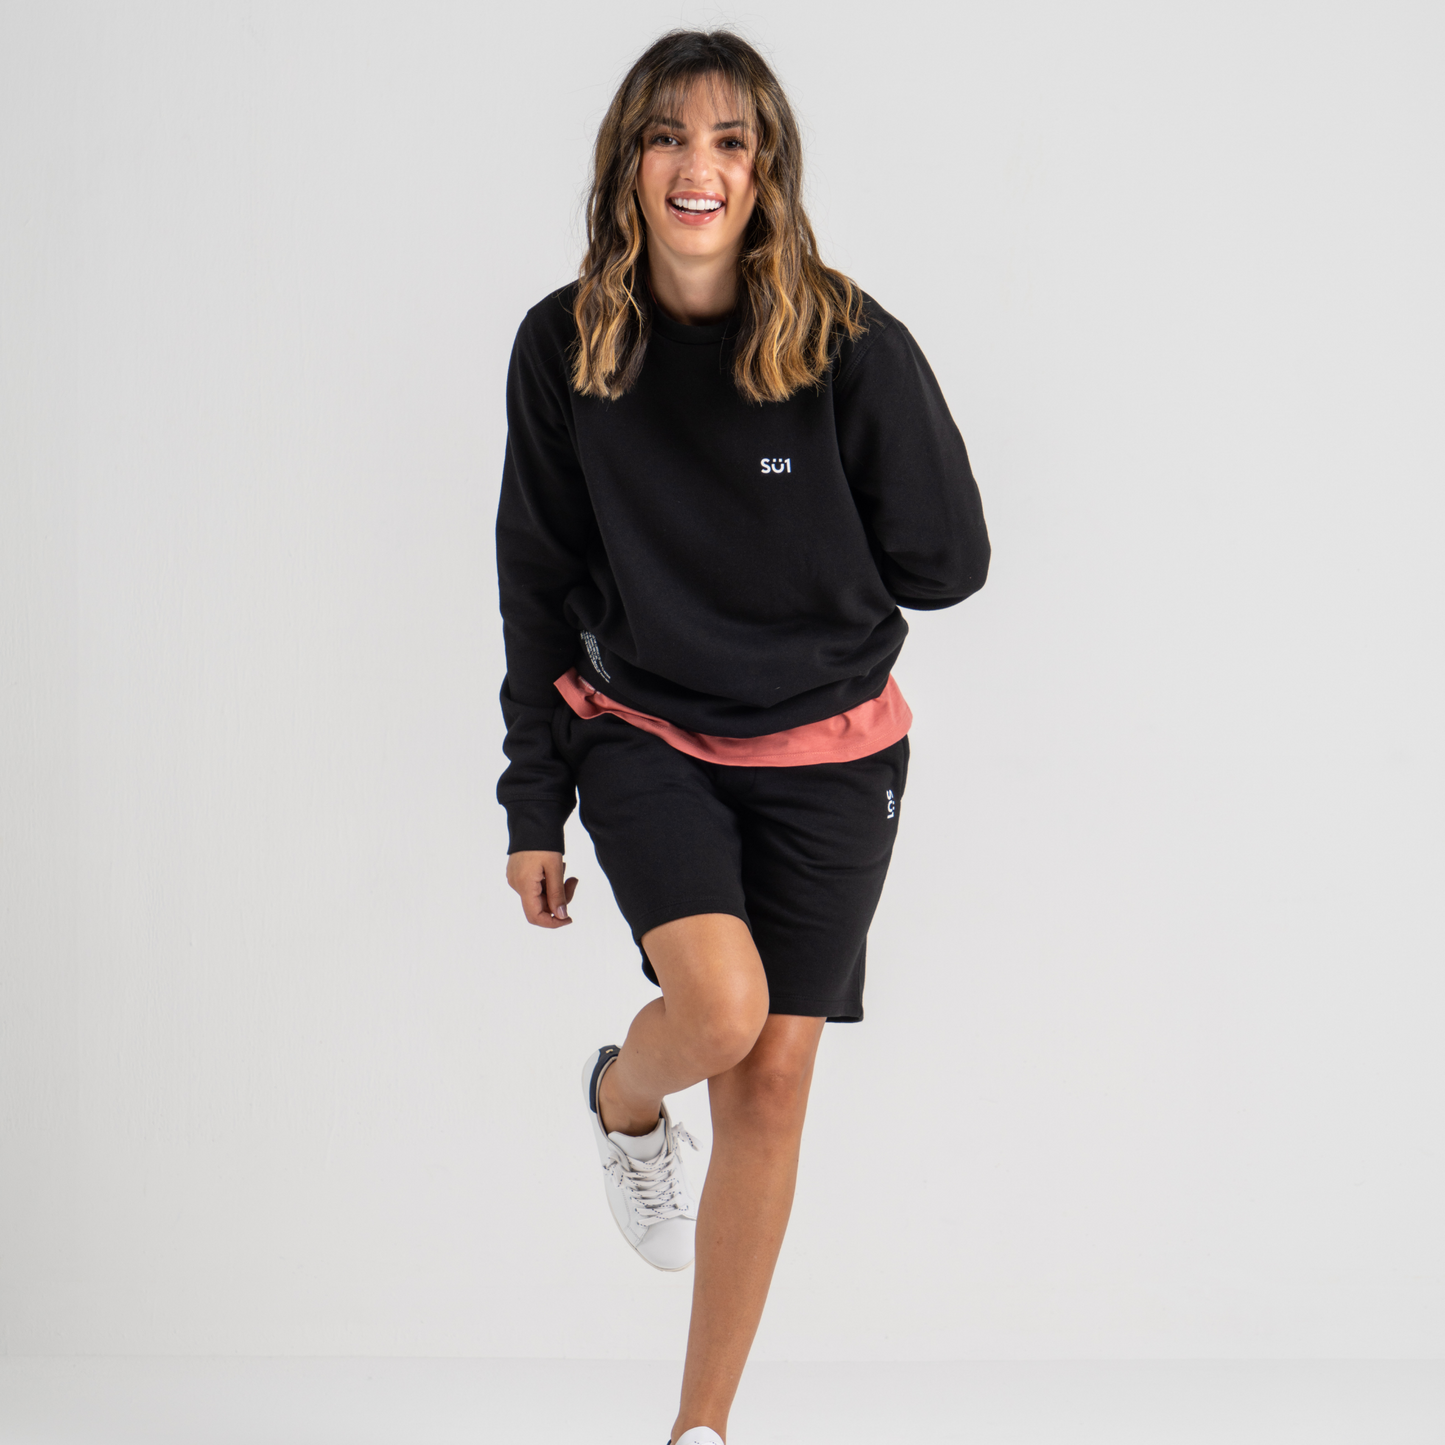 Woman wearing black sweater SU1 clothing brand and black shorts